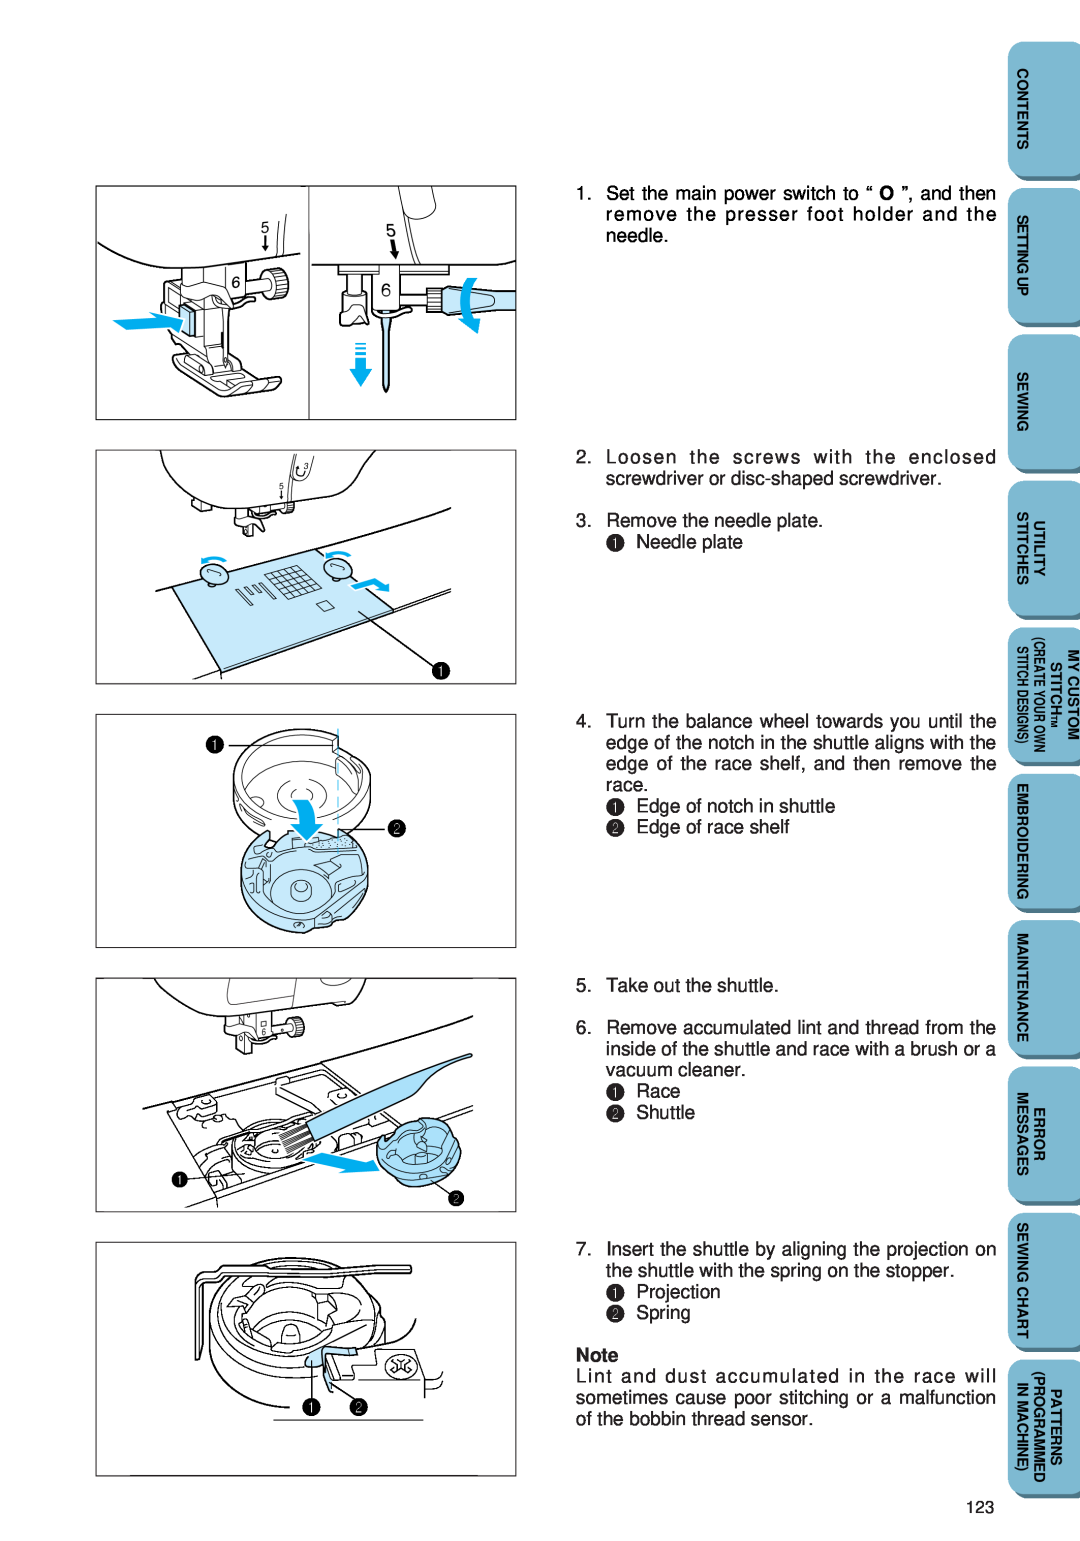 Brother PC 6500 operation manual Remove the needle plate. 1 Needle plate 